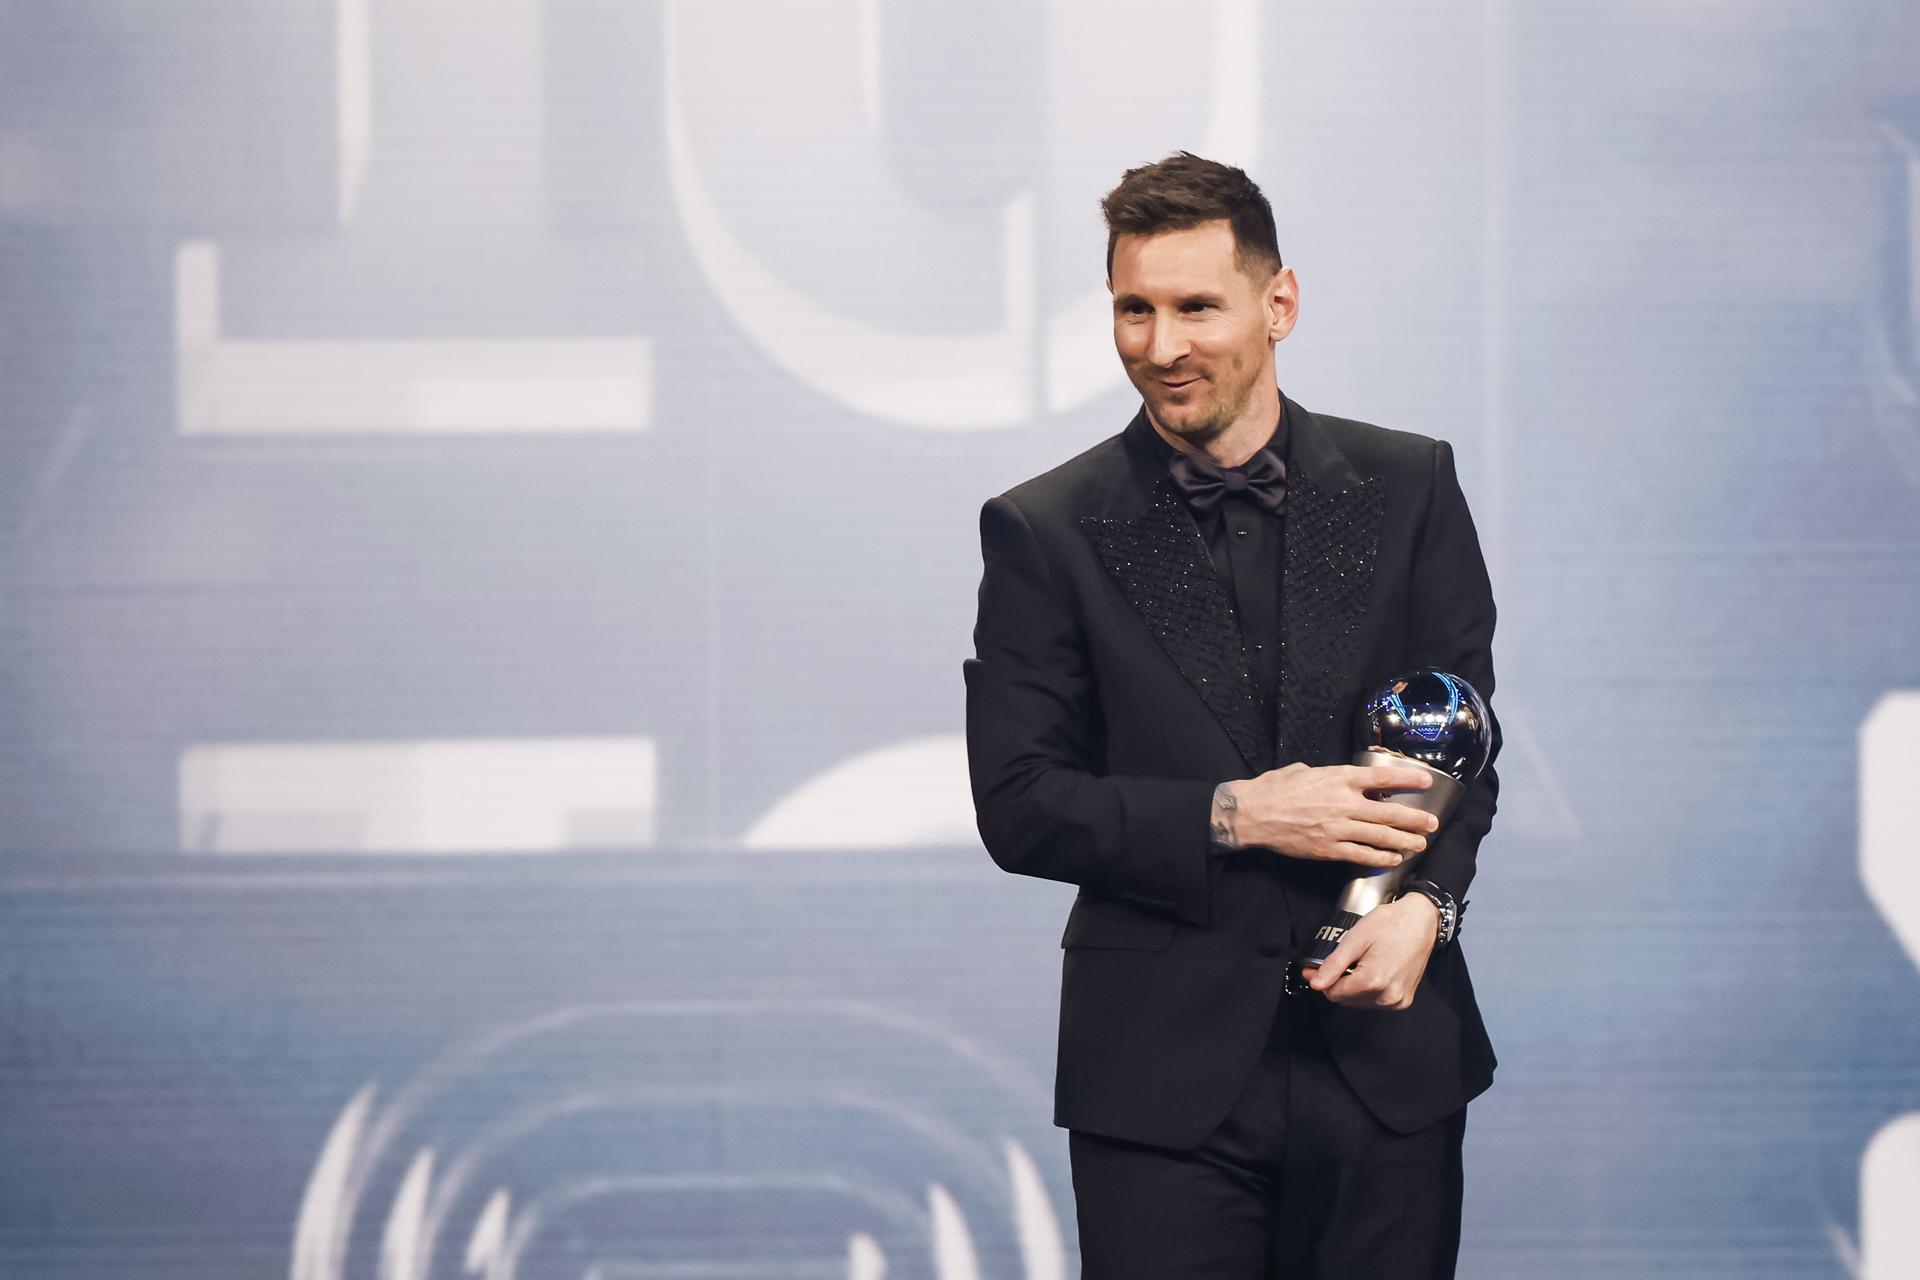 Argentine great Lionel Messi holds his trophy after winning the 2022 The Best FIFA men's player of the year award at a ceremony in Paris, France, on 27 February 2023. The 35-year-old Messi won the prize just over two months after leading his country to victory in the 2022 World Cup in Qatar, a tournament where he was named the most outstanding player. EFE/EPA/YOAN VALAT